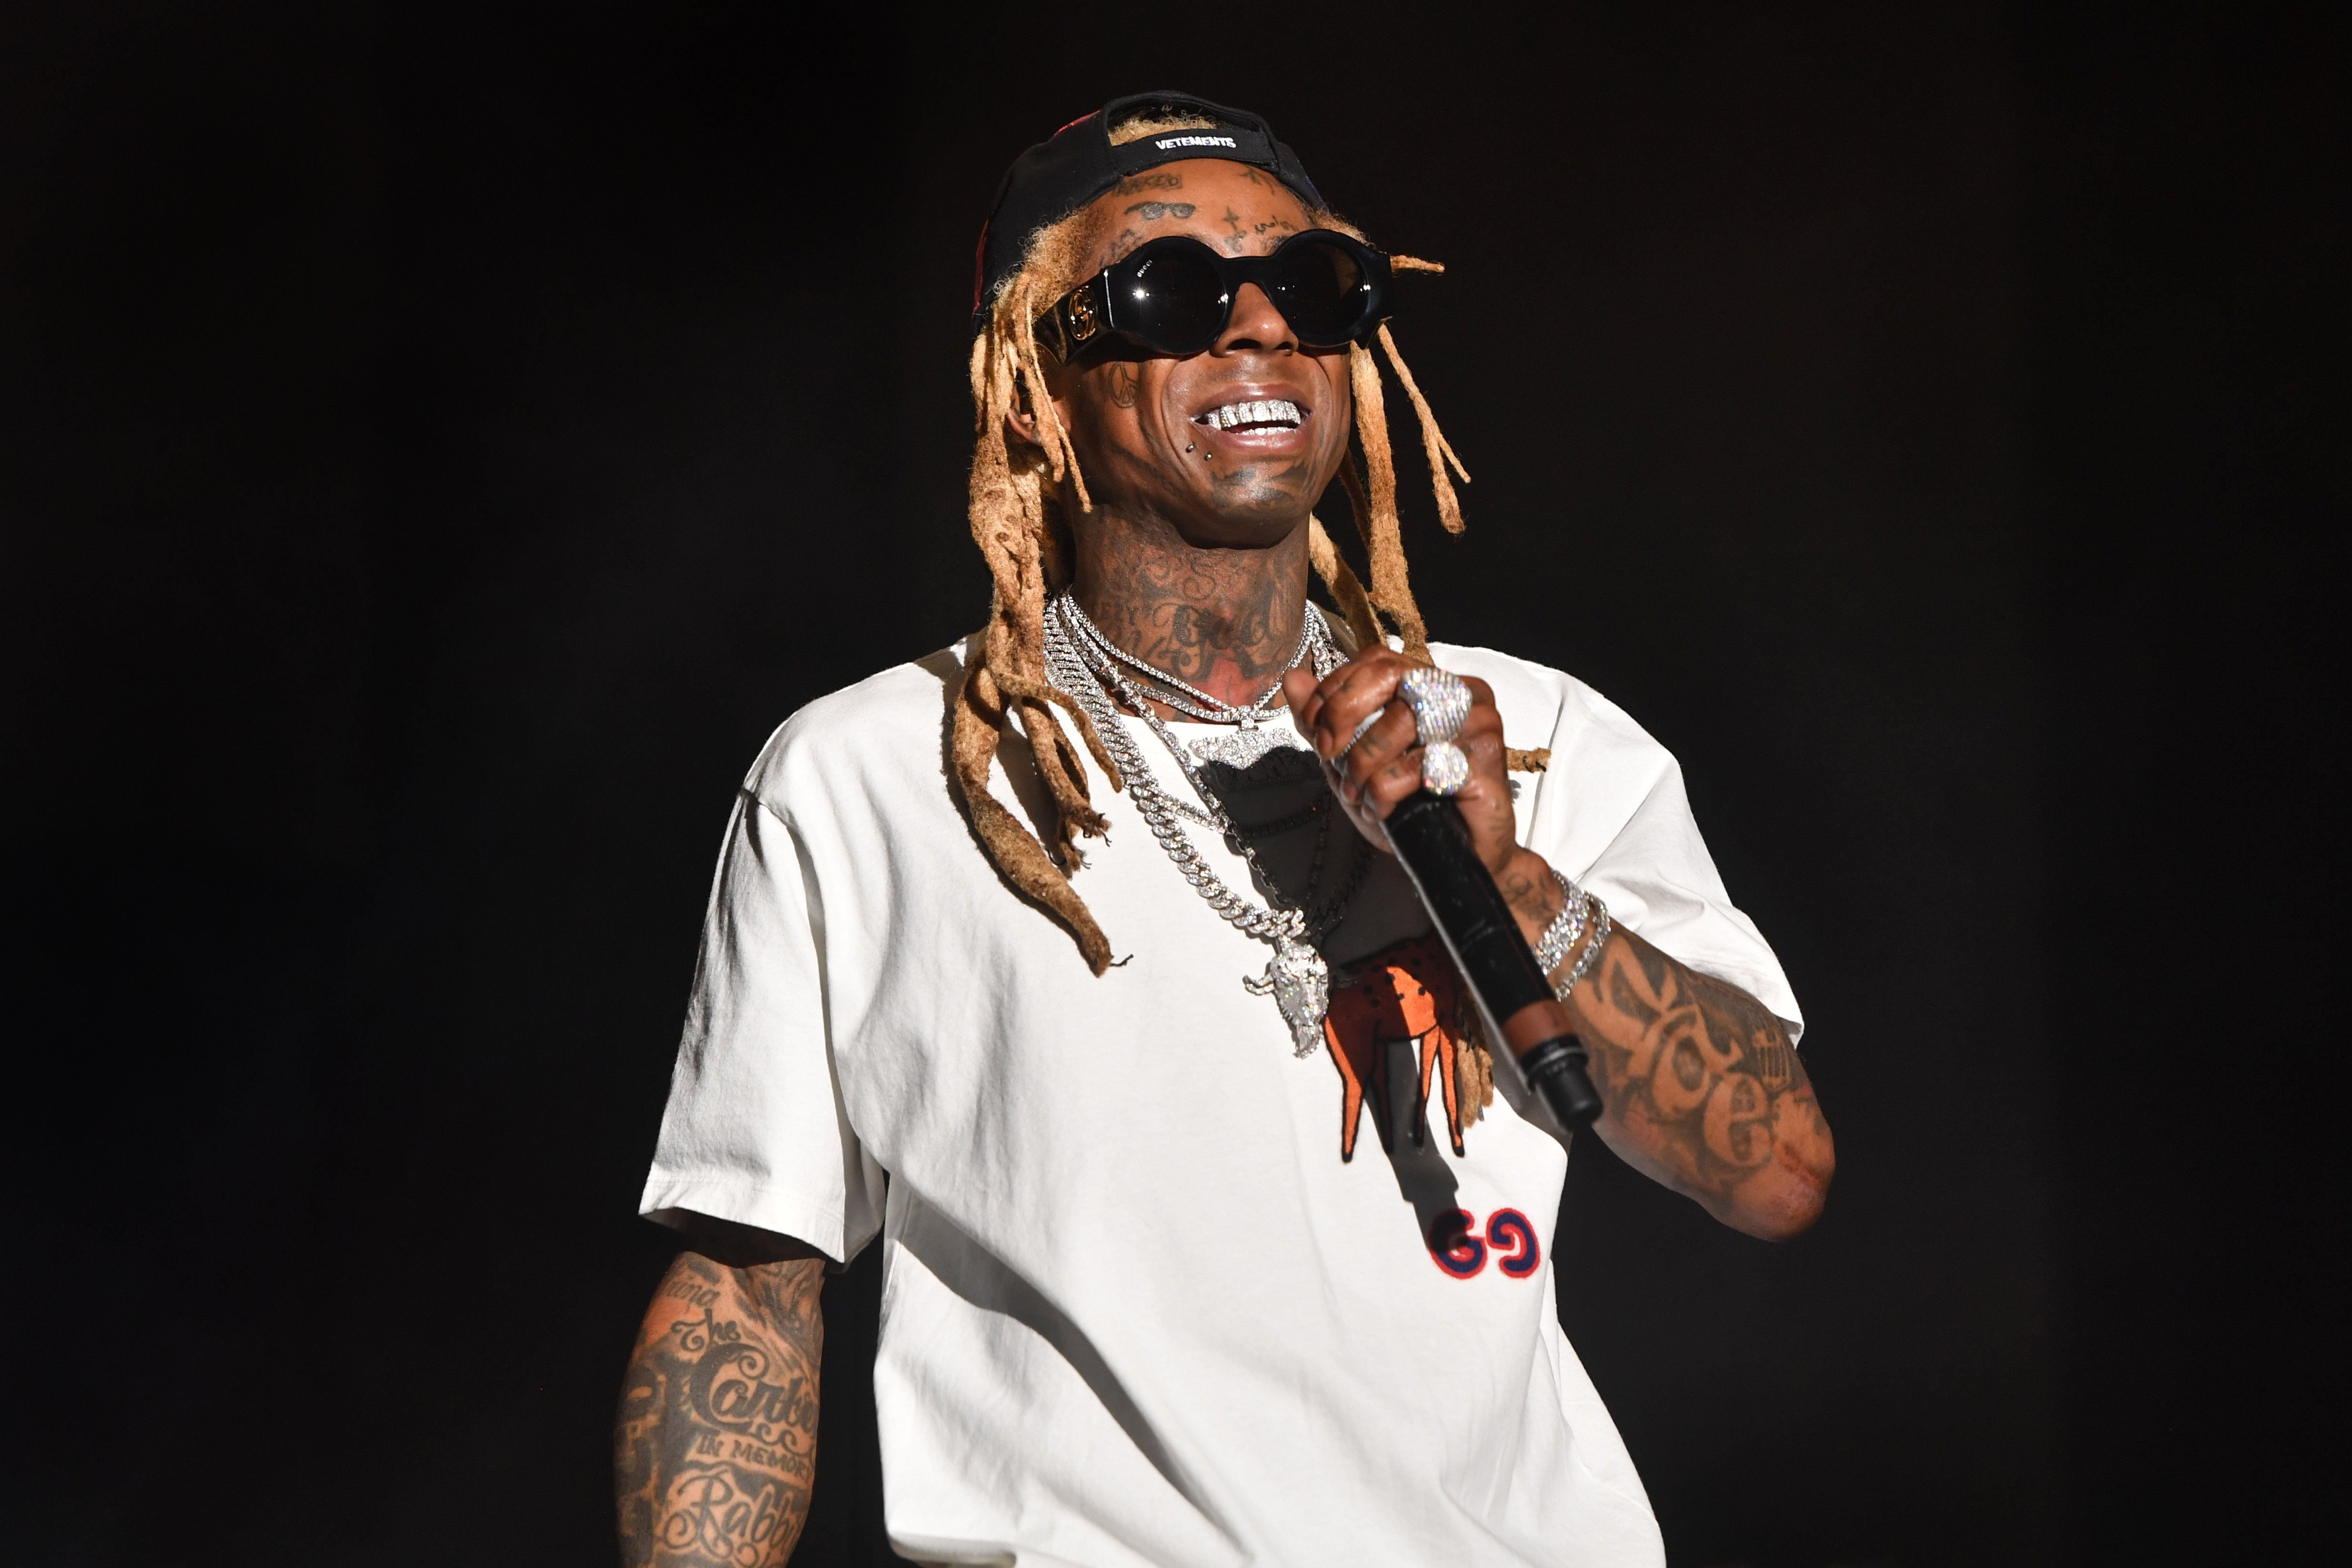 Lil Wayne performs during Lil Weezyana 2019 at UNO Lakefront Arena on September 07, 2019 |Photo: Getty images